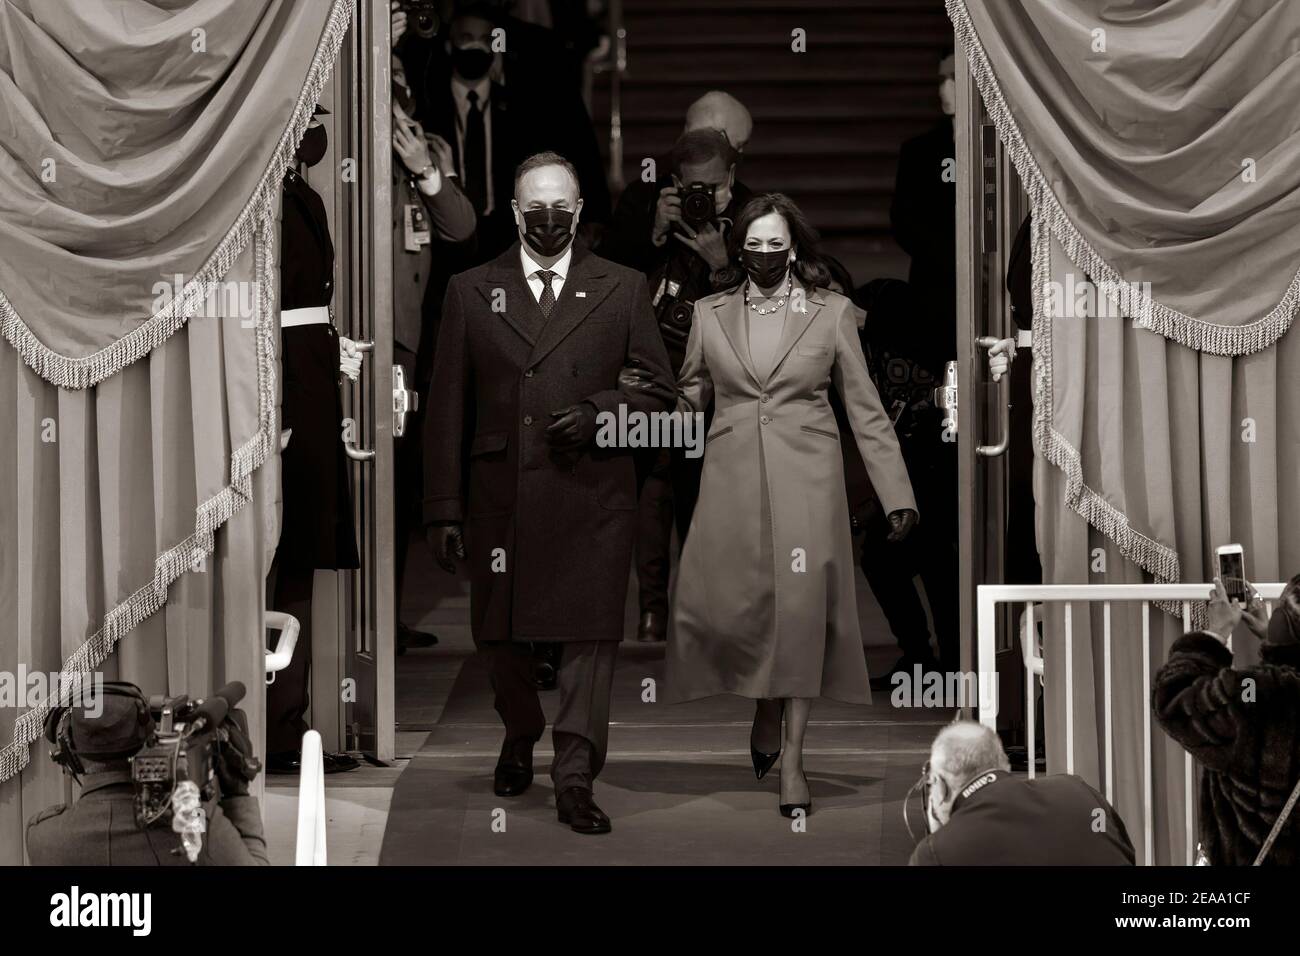 Vice President-elect Kamala Harris and her husband Mr. Doug Emhoff arrive to the inaugural platform for the 59th Presidential Inauguration Wednesday, Jan. 20, 2021, at the U.S. Capitol in Washington, D.C. (Official White House Photo by Chuck Kennedy) Stock Photo